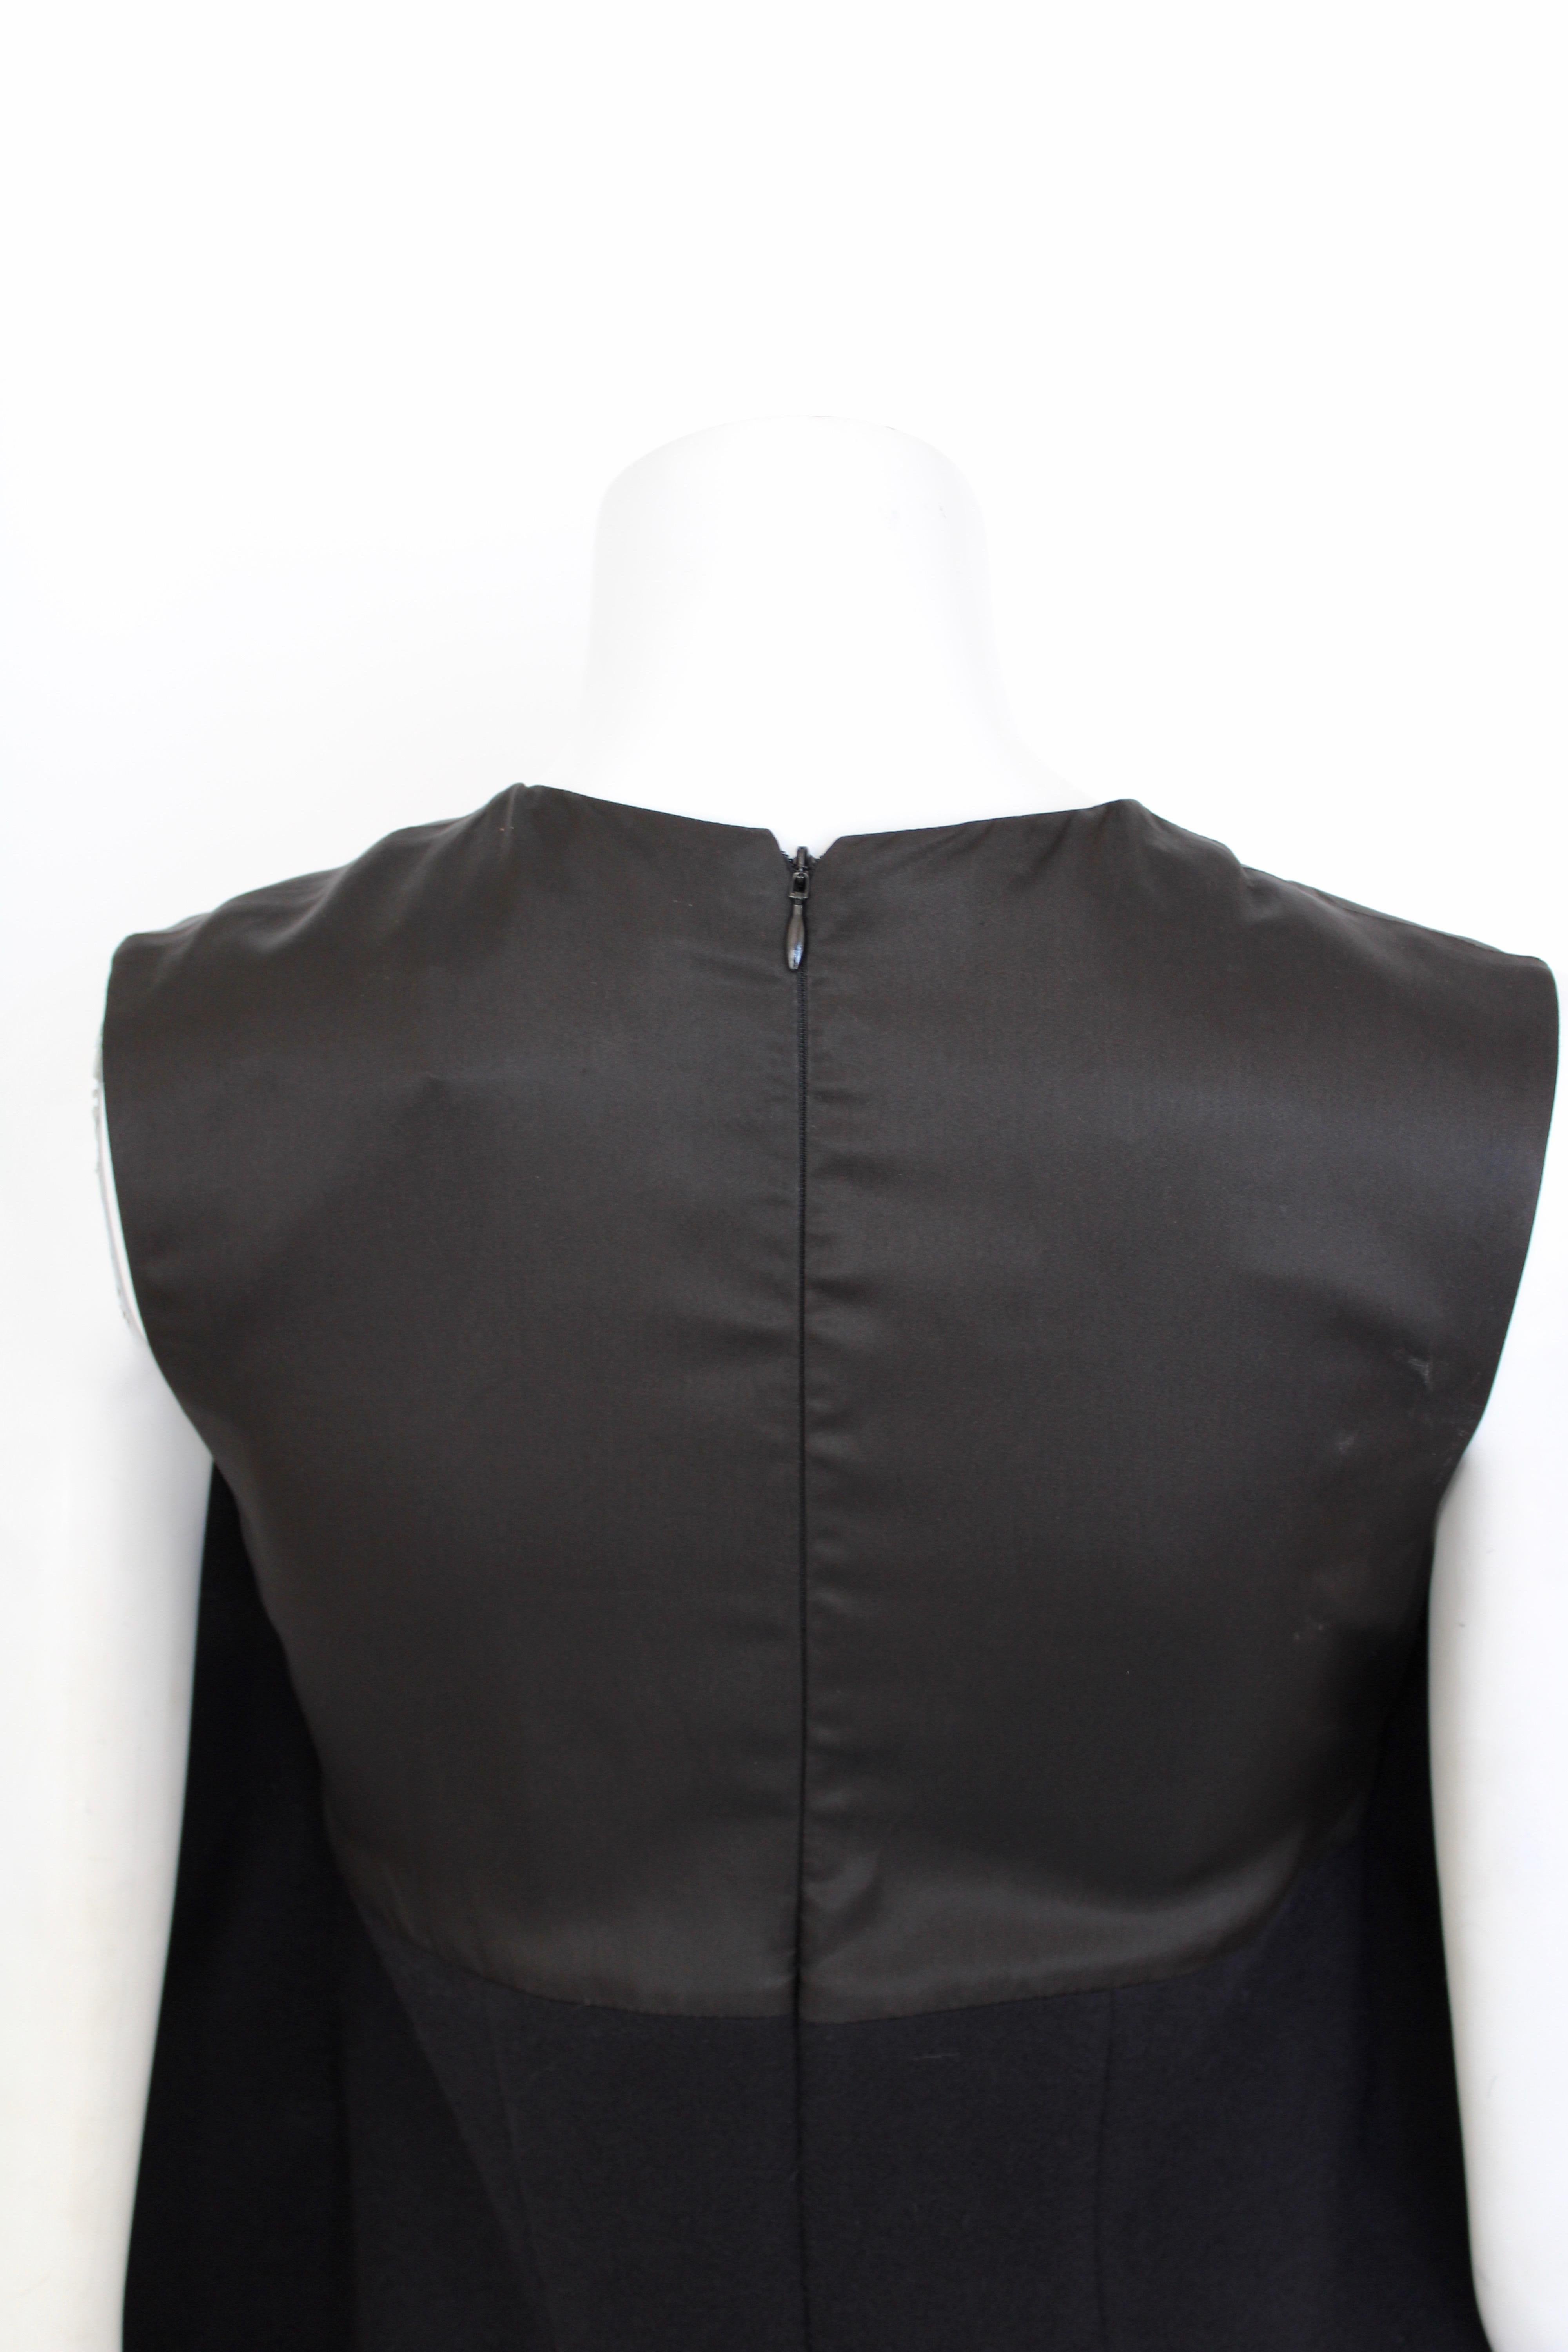 Maison Margiela Avant Garde dress In Excellent Condition For Sale In New York, NY